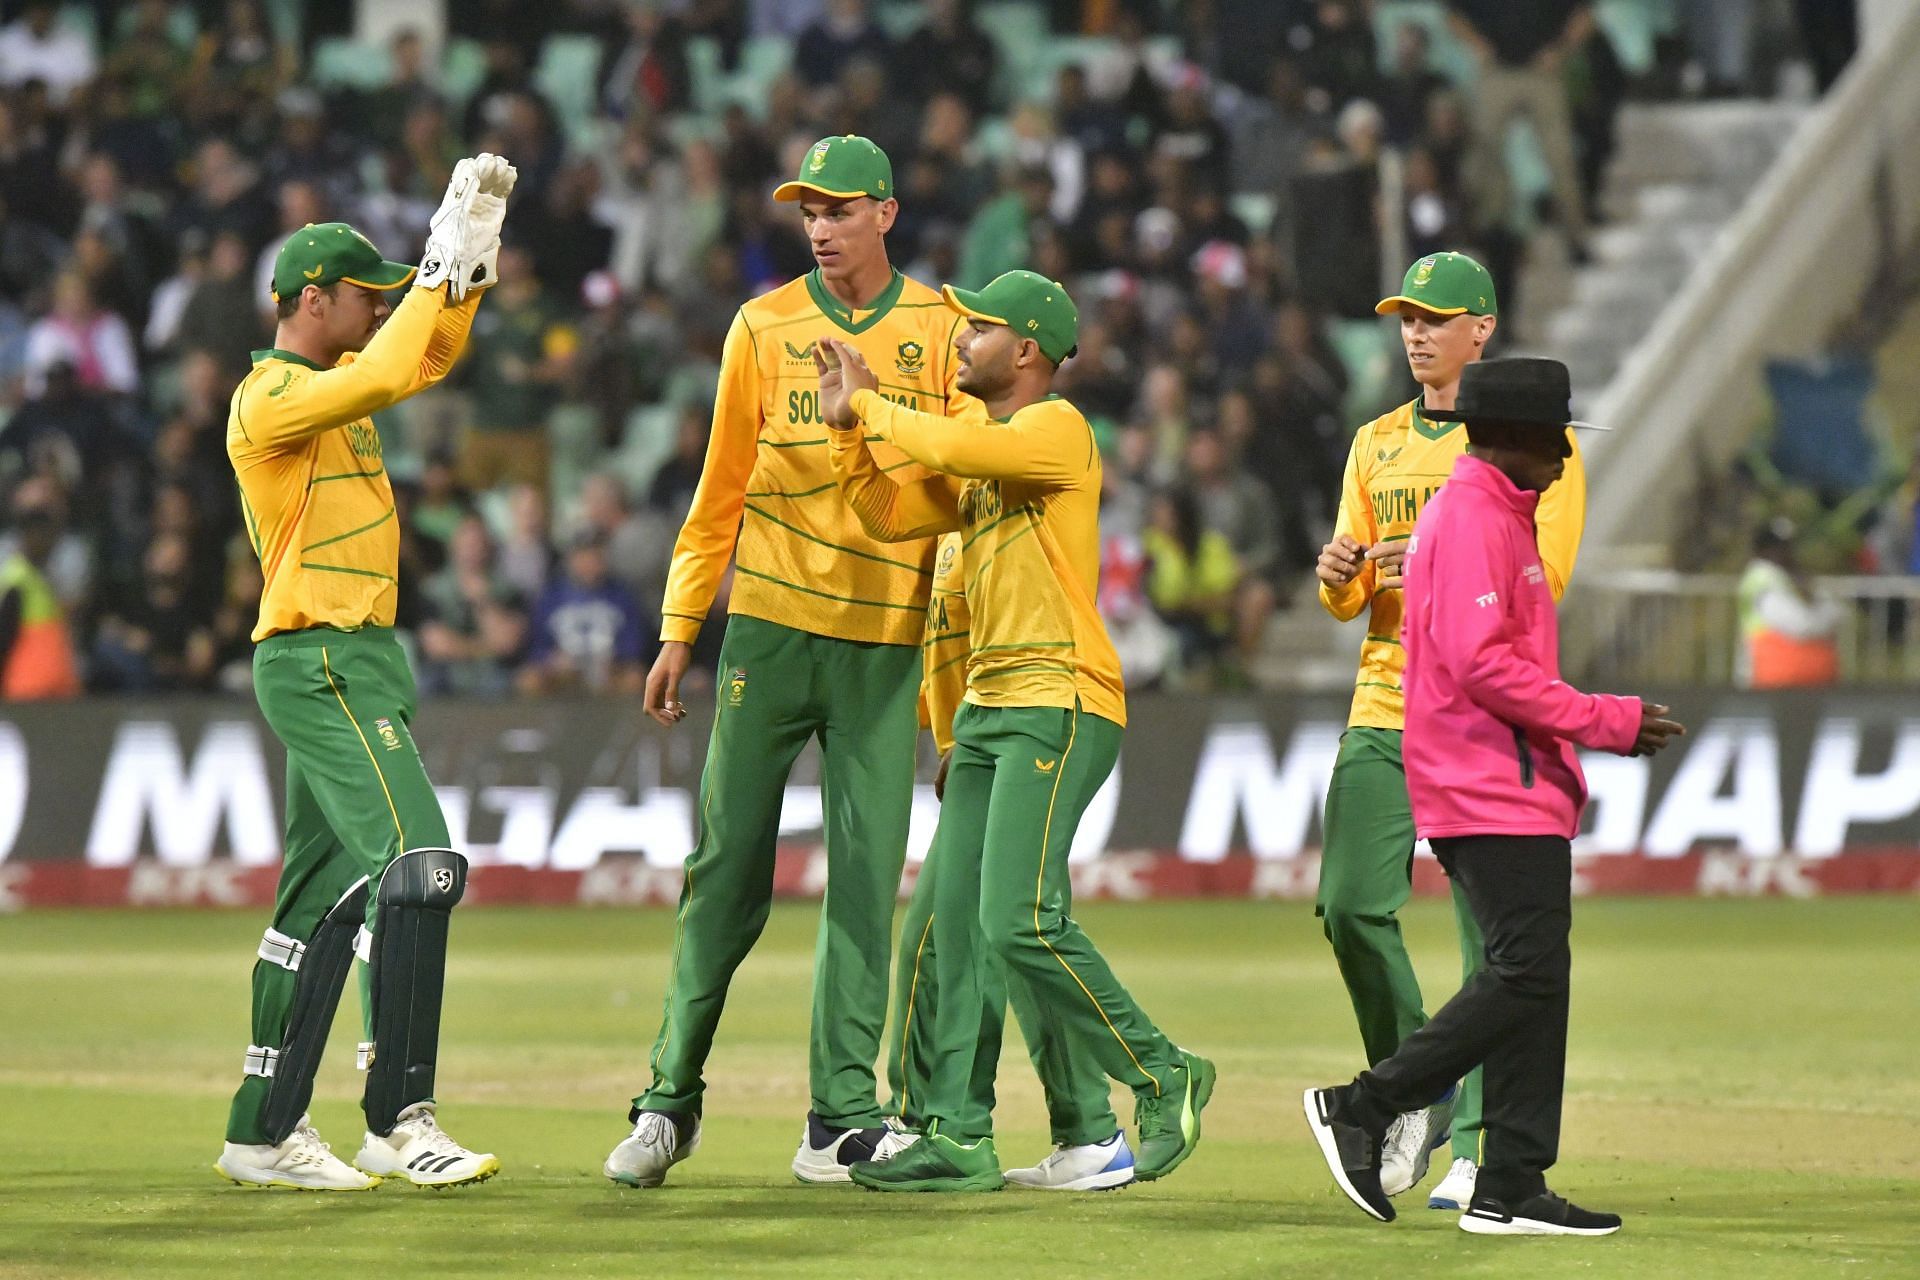 South African cricket team. (Credits: Getty)